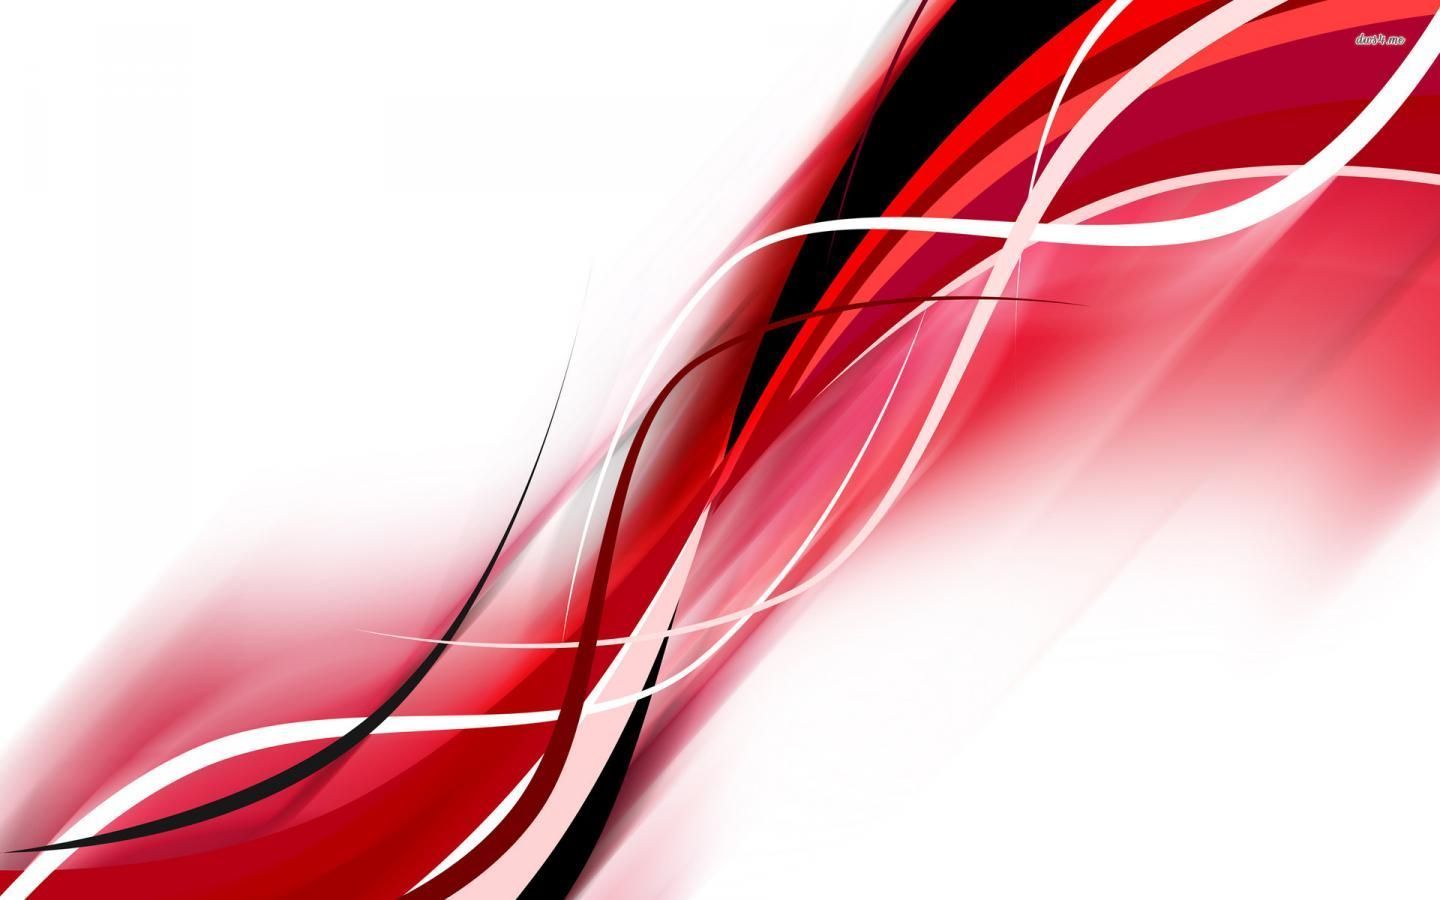 Red White and Black Abstract Wallpaper Free Red White and Black Abstract Background